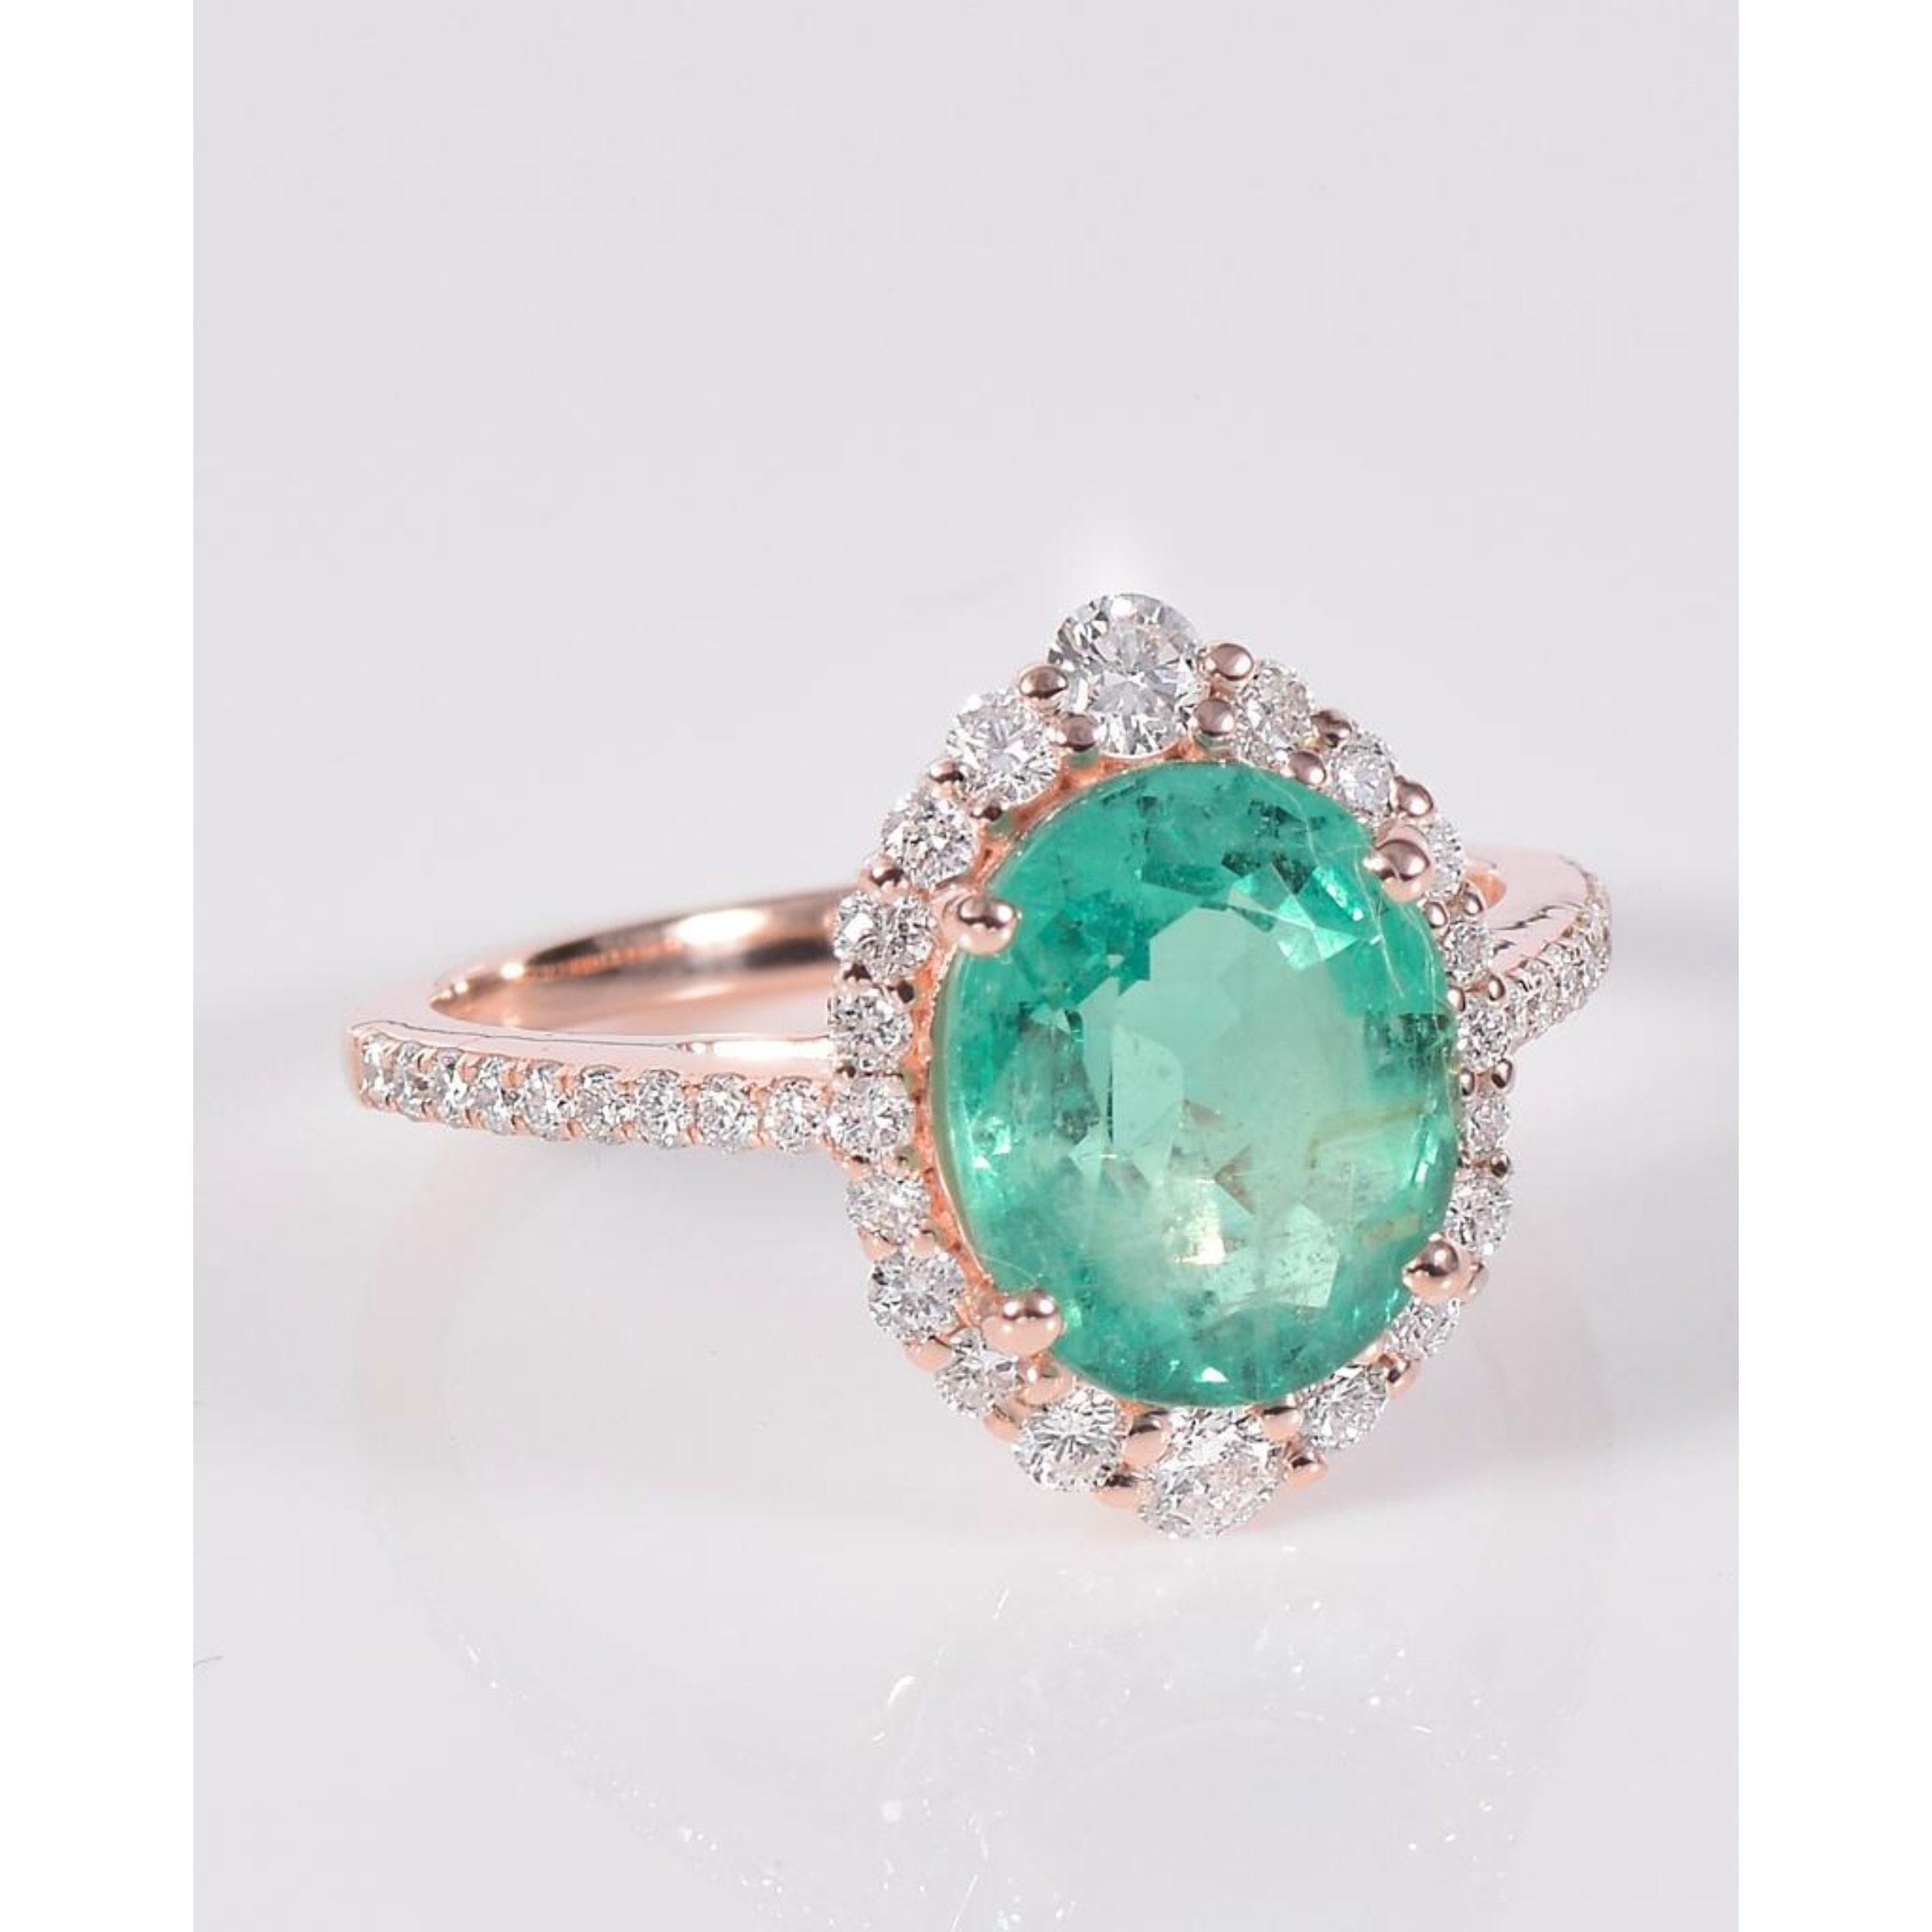 For Sale:  18K Gold 2 CT Natural Emerald and Diamond Antique Art Deco Style Engagement Ring 7